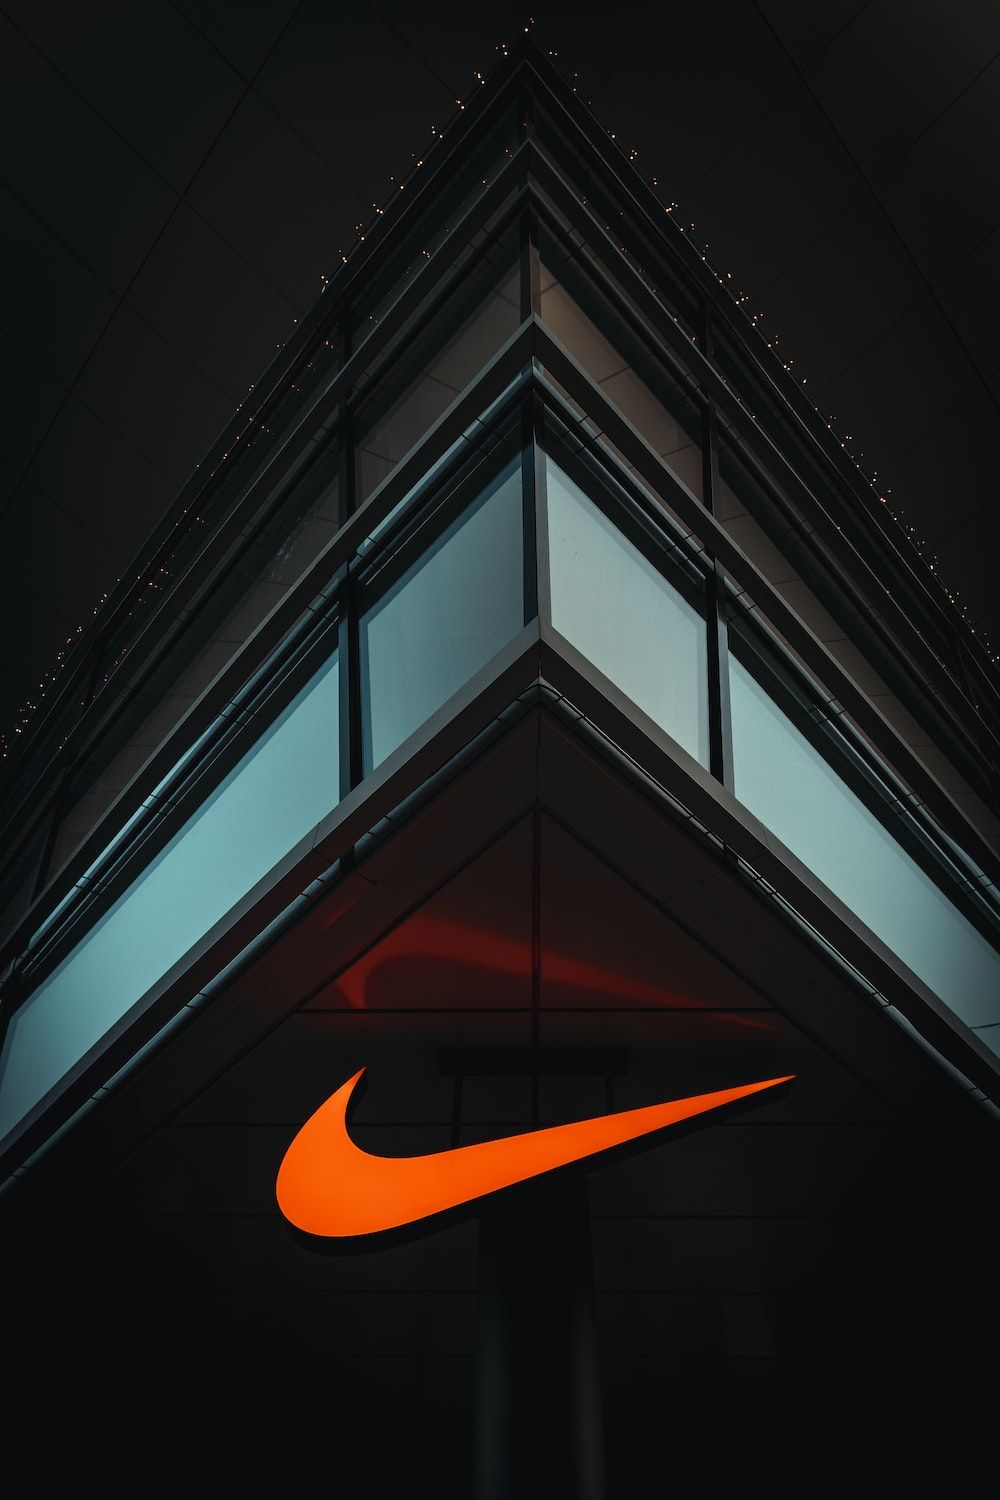 A building with a Nike sign on it - Nike